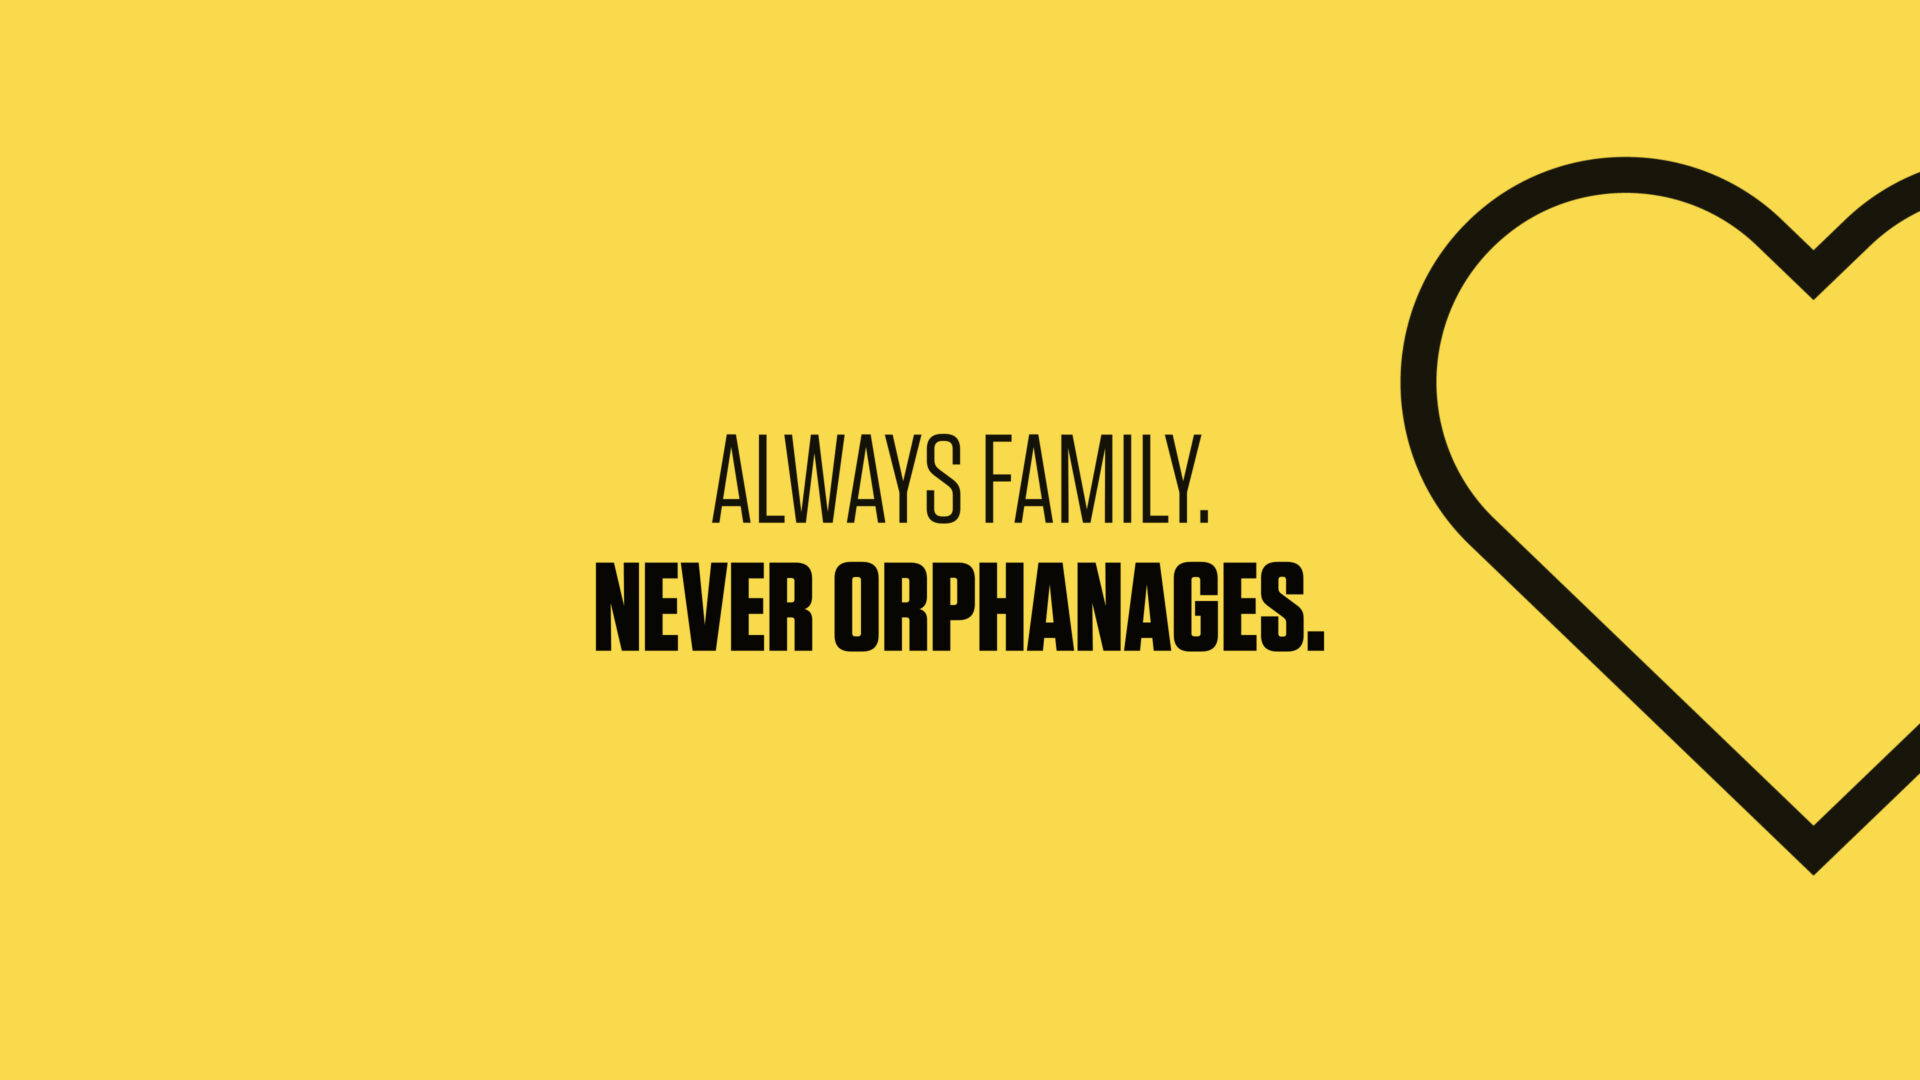 Always family. Never orphanages.